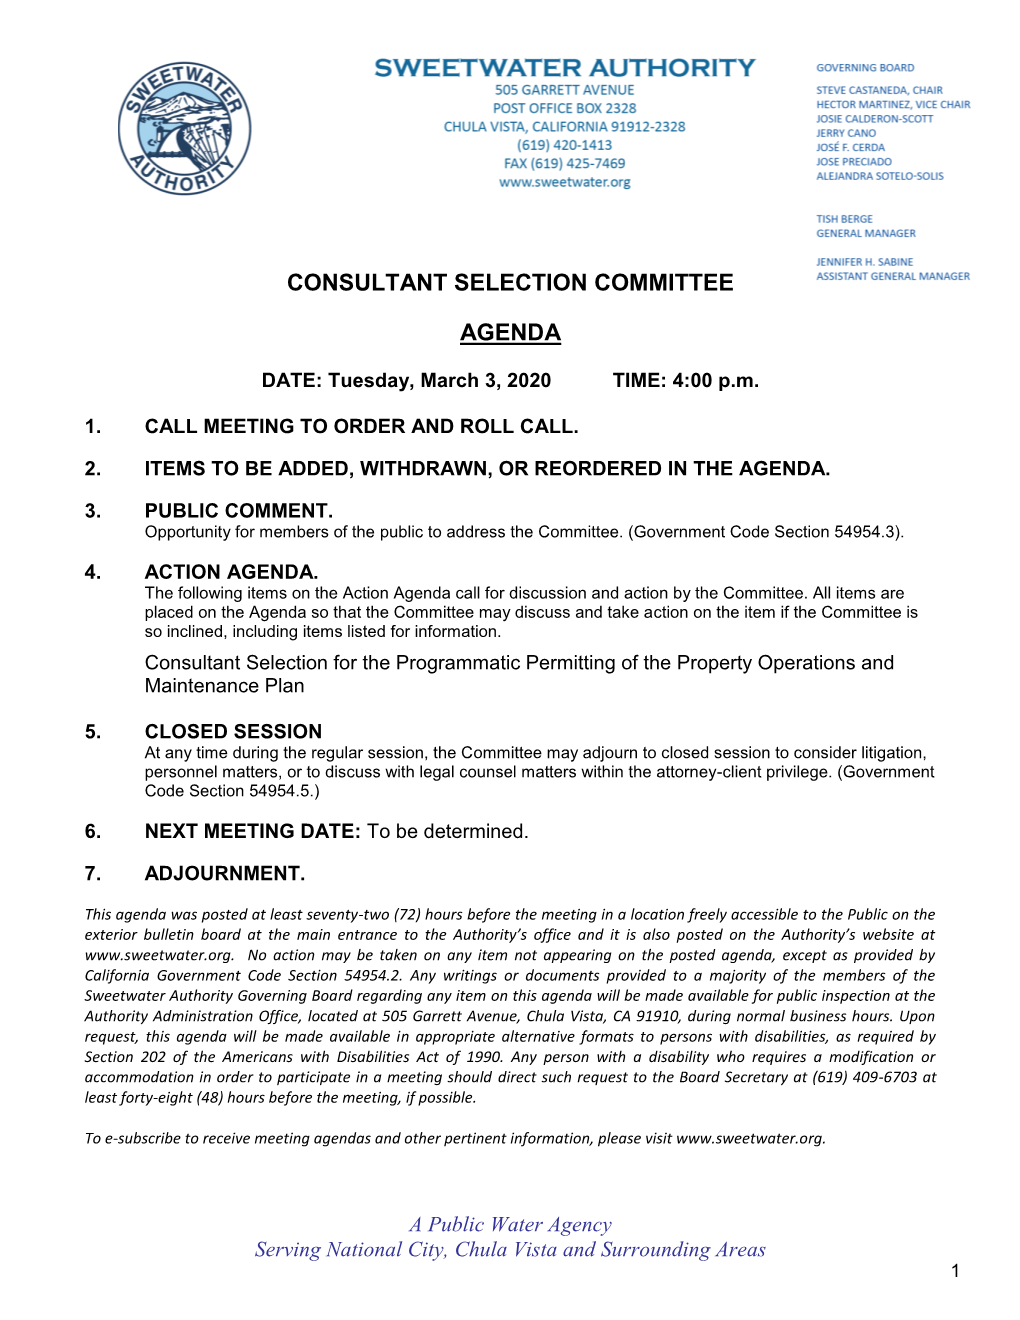 Consultant Selection Committee Agenda